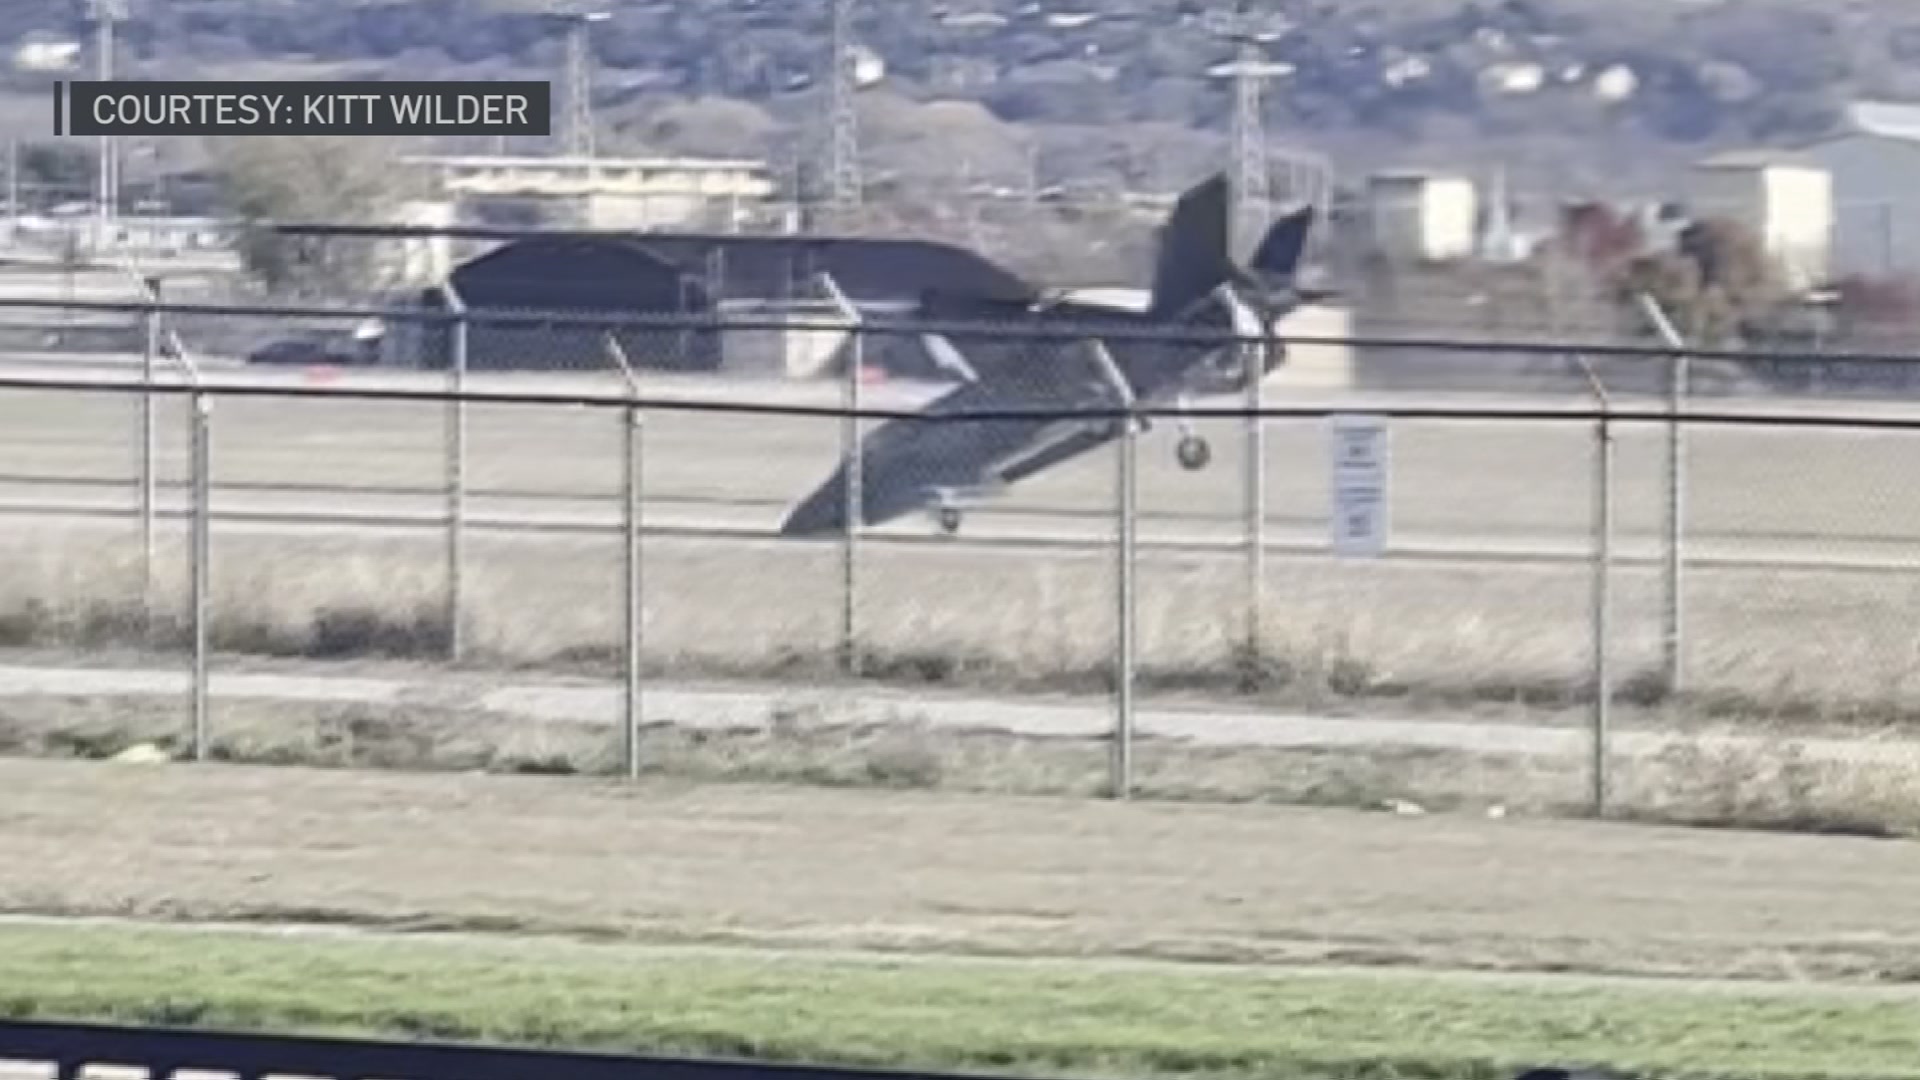 911 call released from military pilot who ejected from F-35 fighter jet 